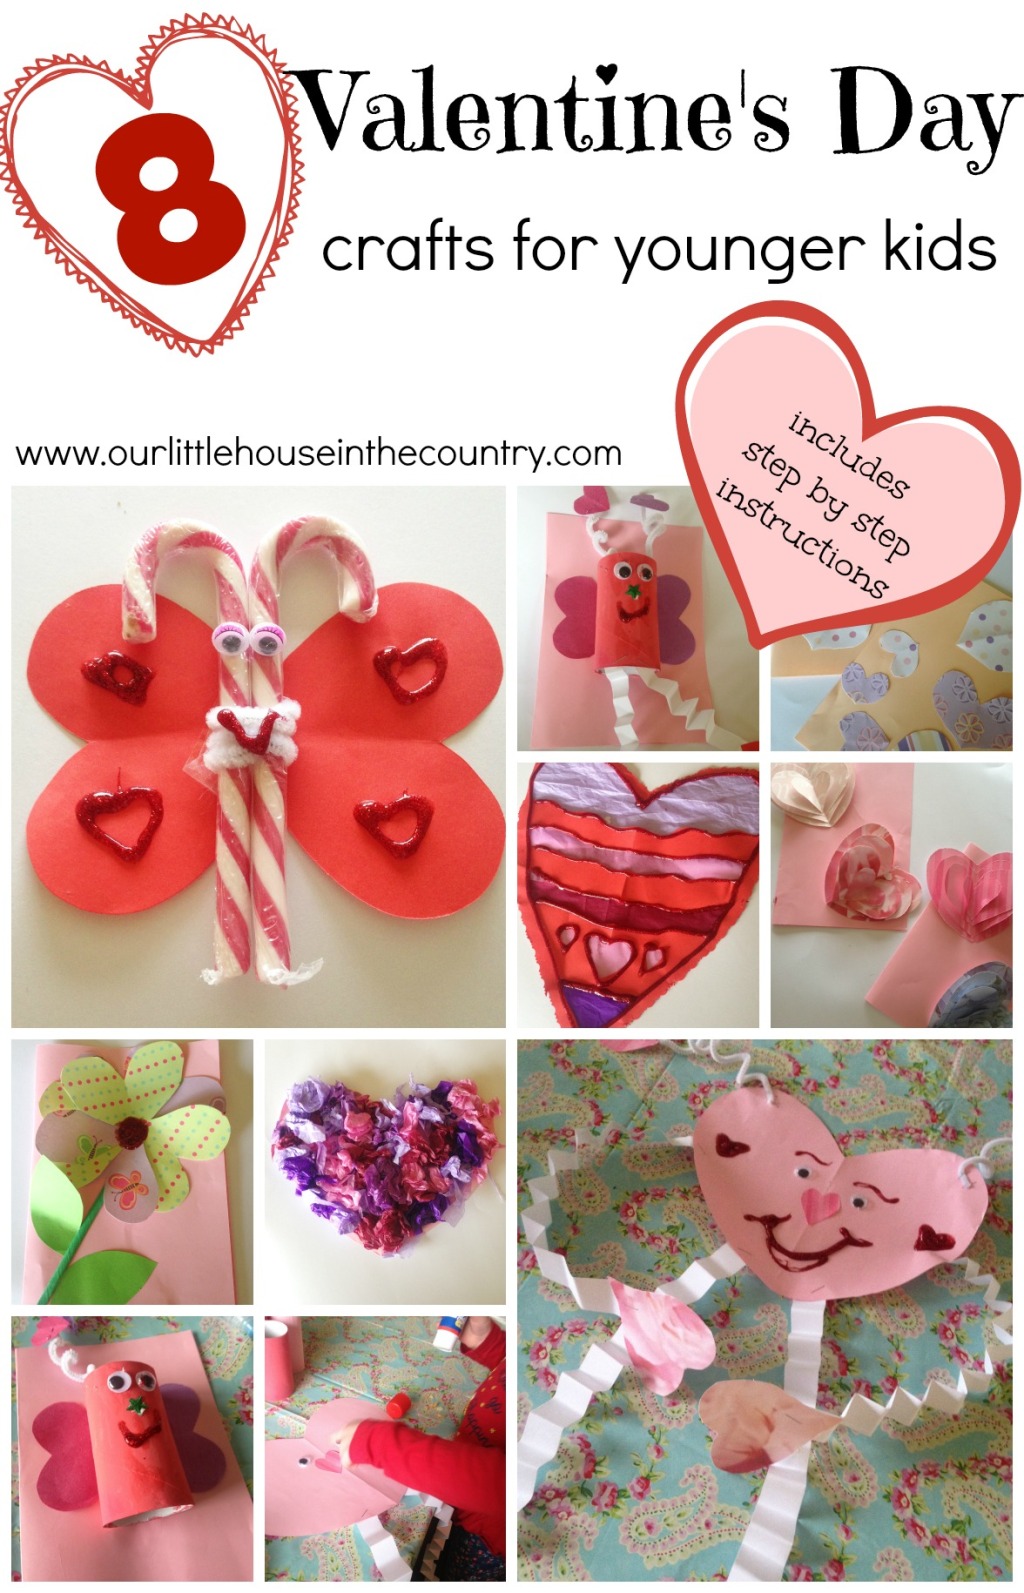 Valentine’s Day Crafts for Younger Children (Preschool and Early Primary/Kindergarten)